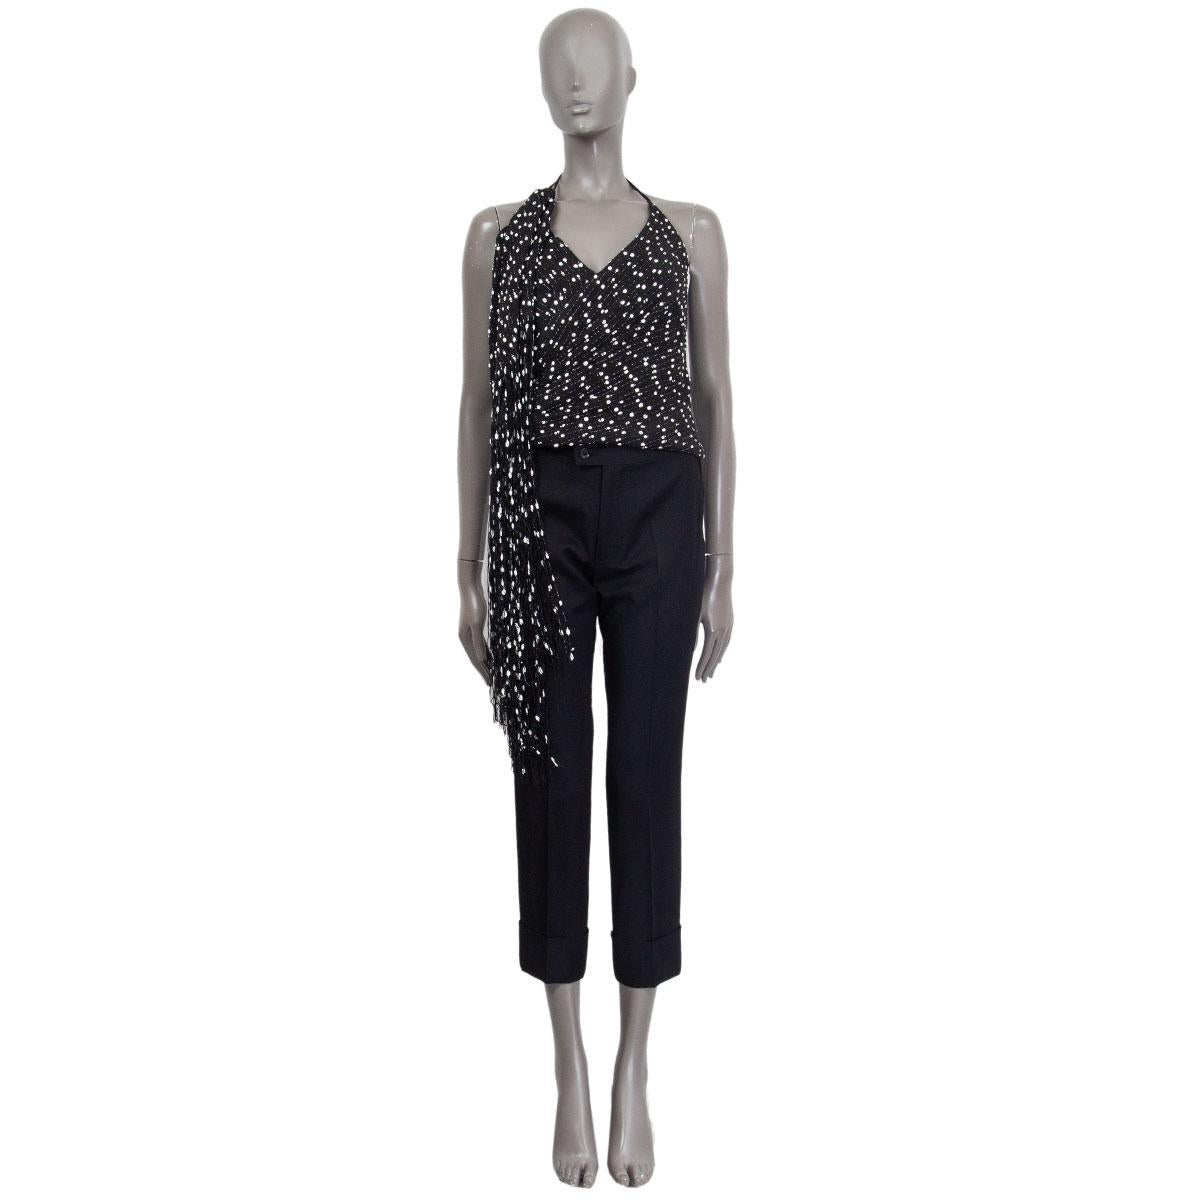 100% authentic Jacquemus La Riviera 'Le Haut Valoria' fringed top in black&white cotton (35%), polyamide (30%), polyester (25%) and viscose (10%) featuring a fringed drape starting from the right shoulder. Closes with one hook and a concealed zipper